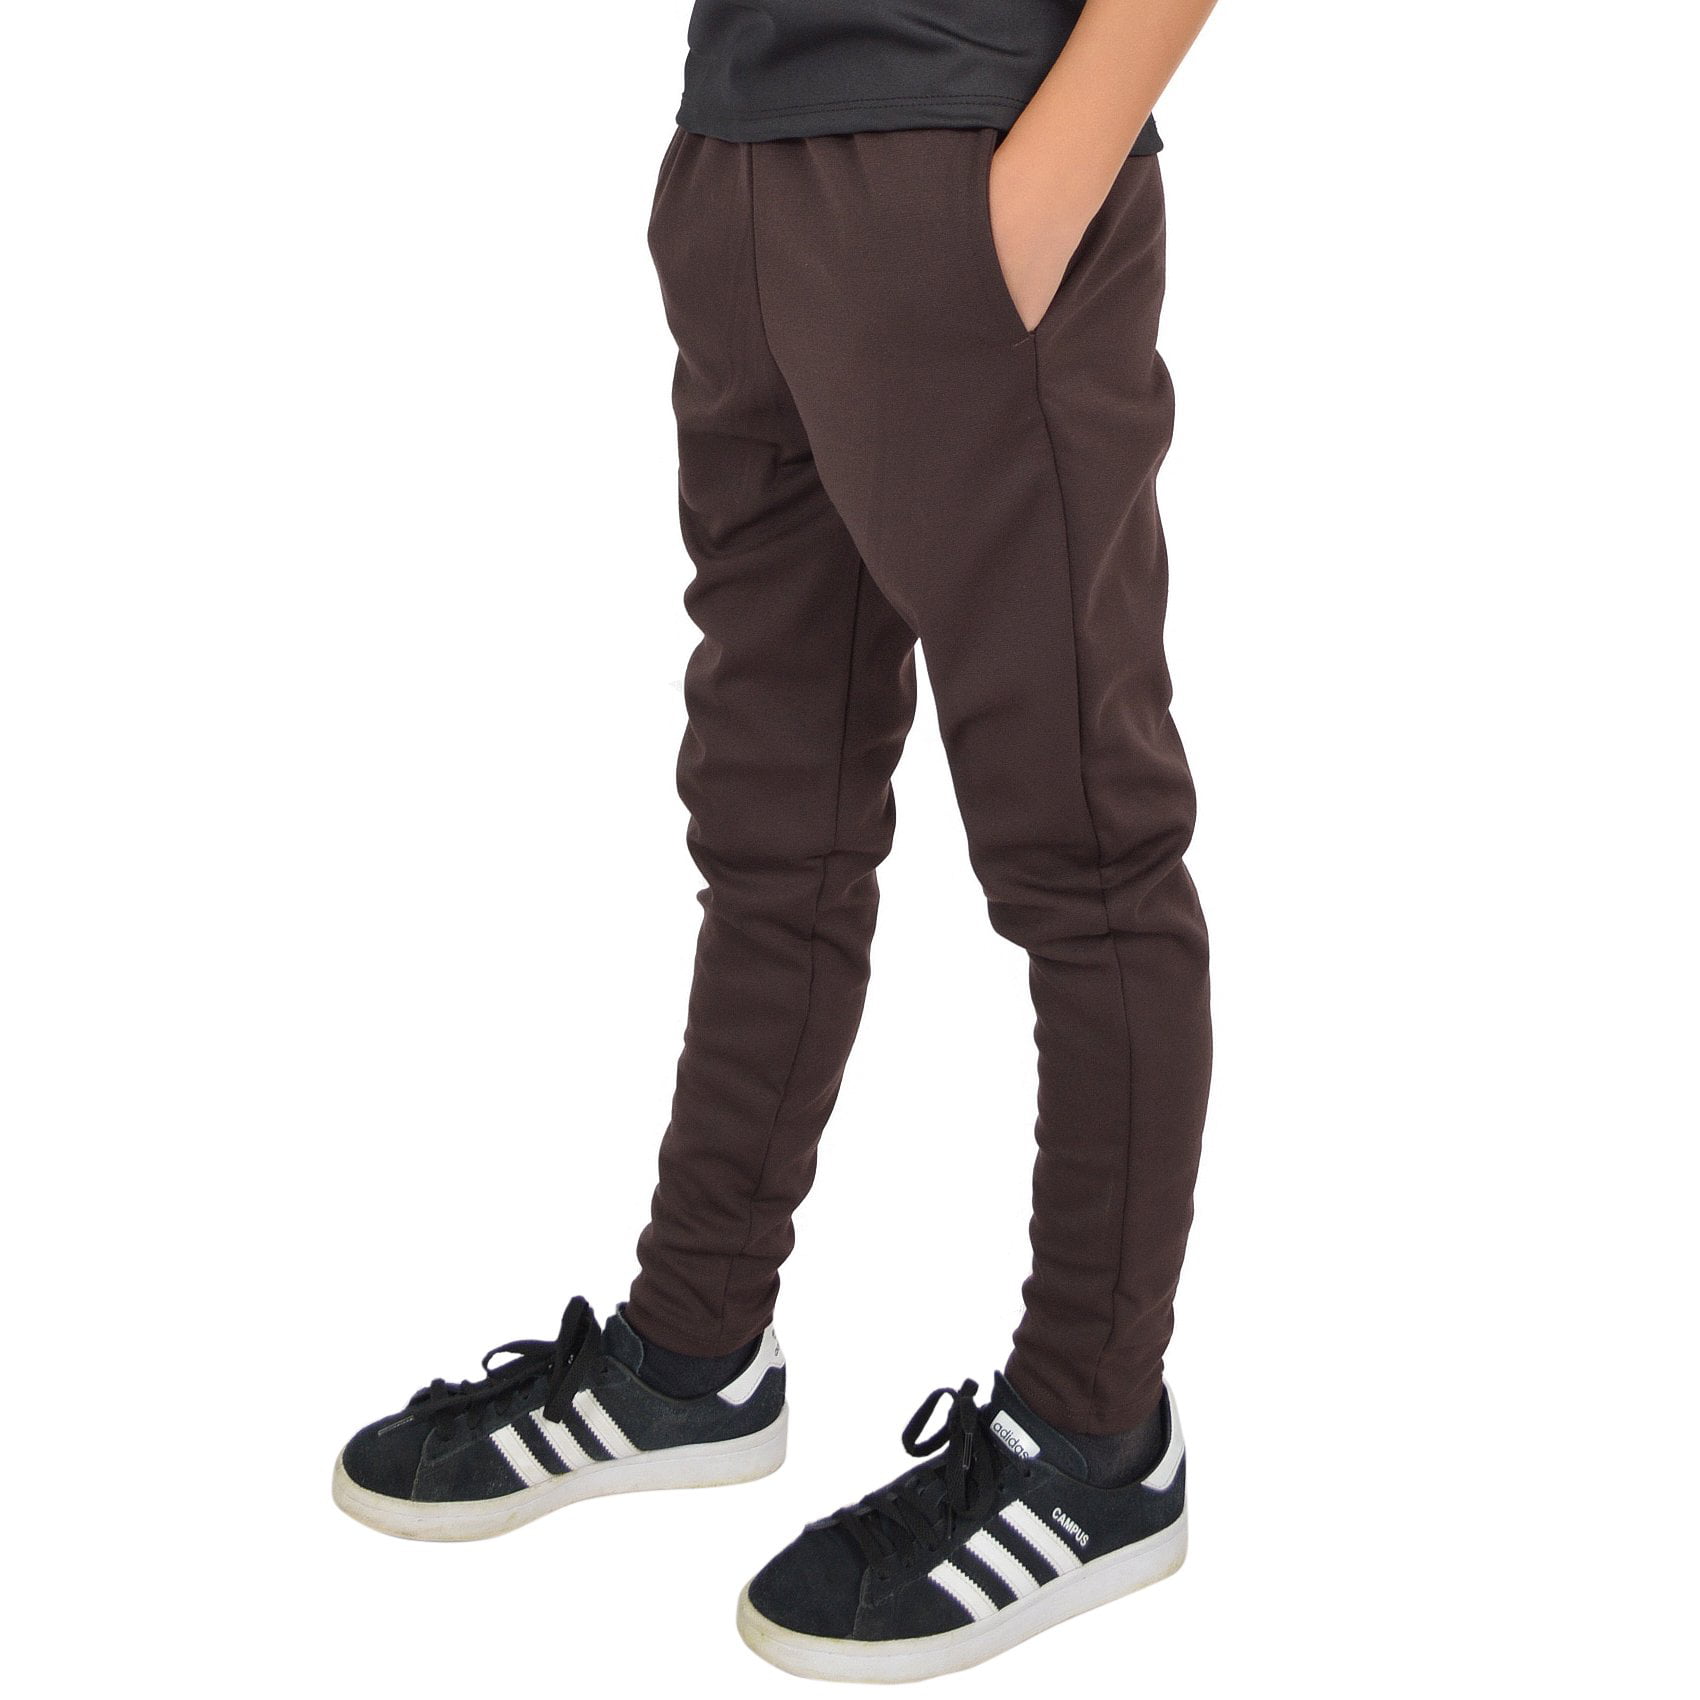 Stretch is Comfort Boys and Mens Slim Fit Jogger Play Pant